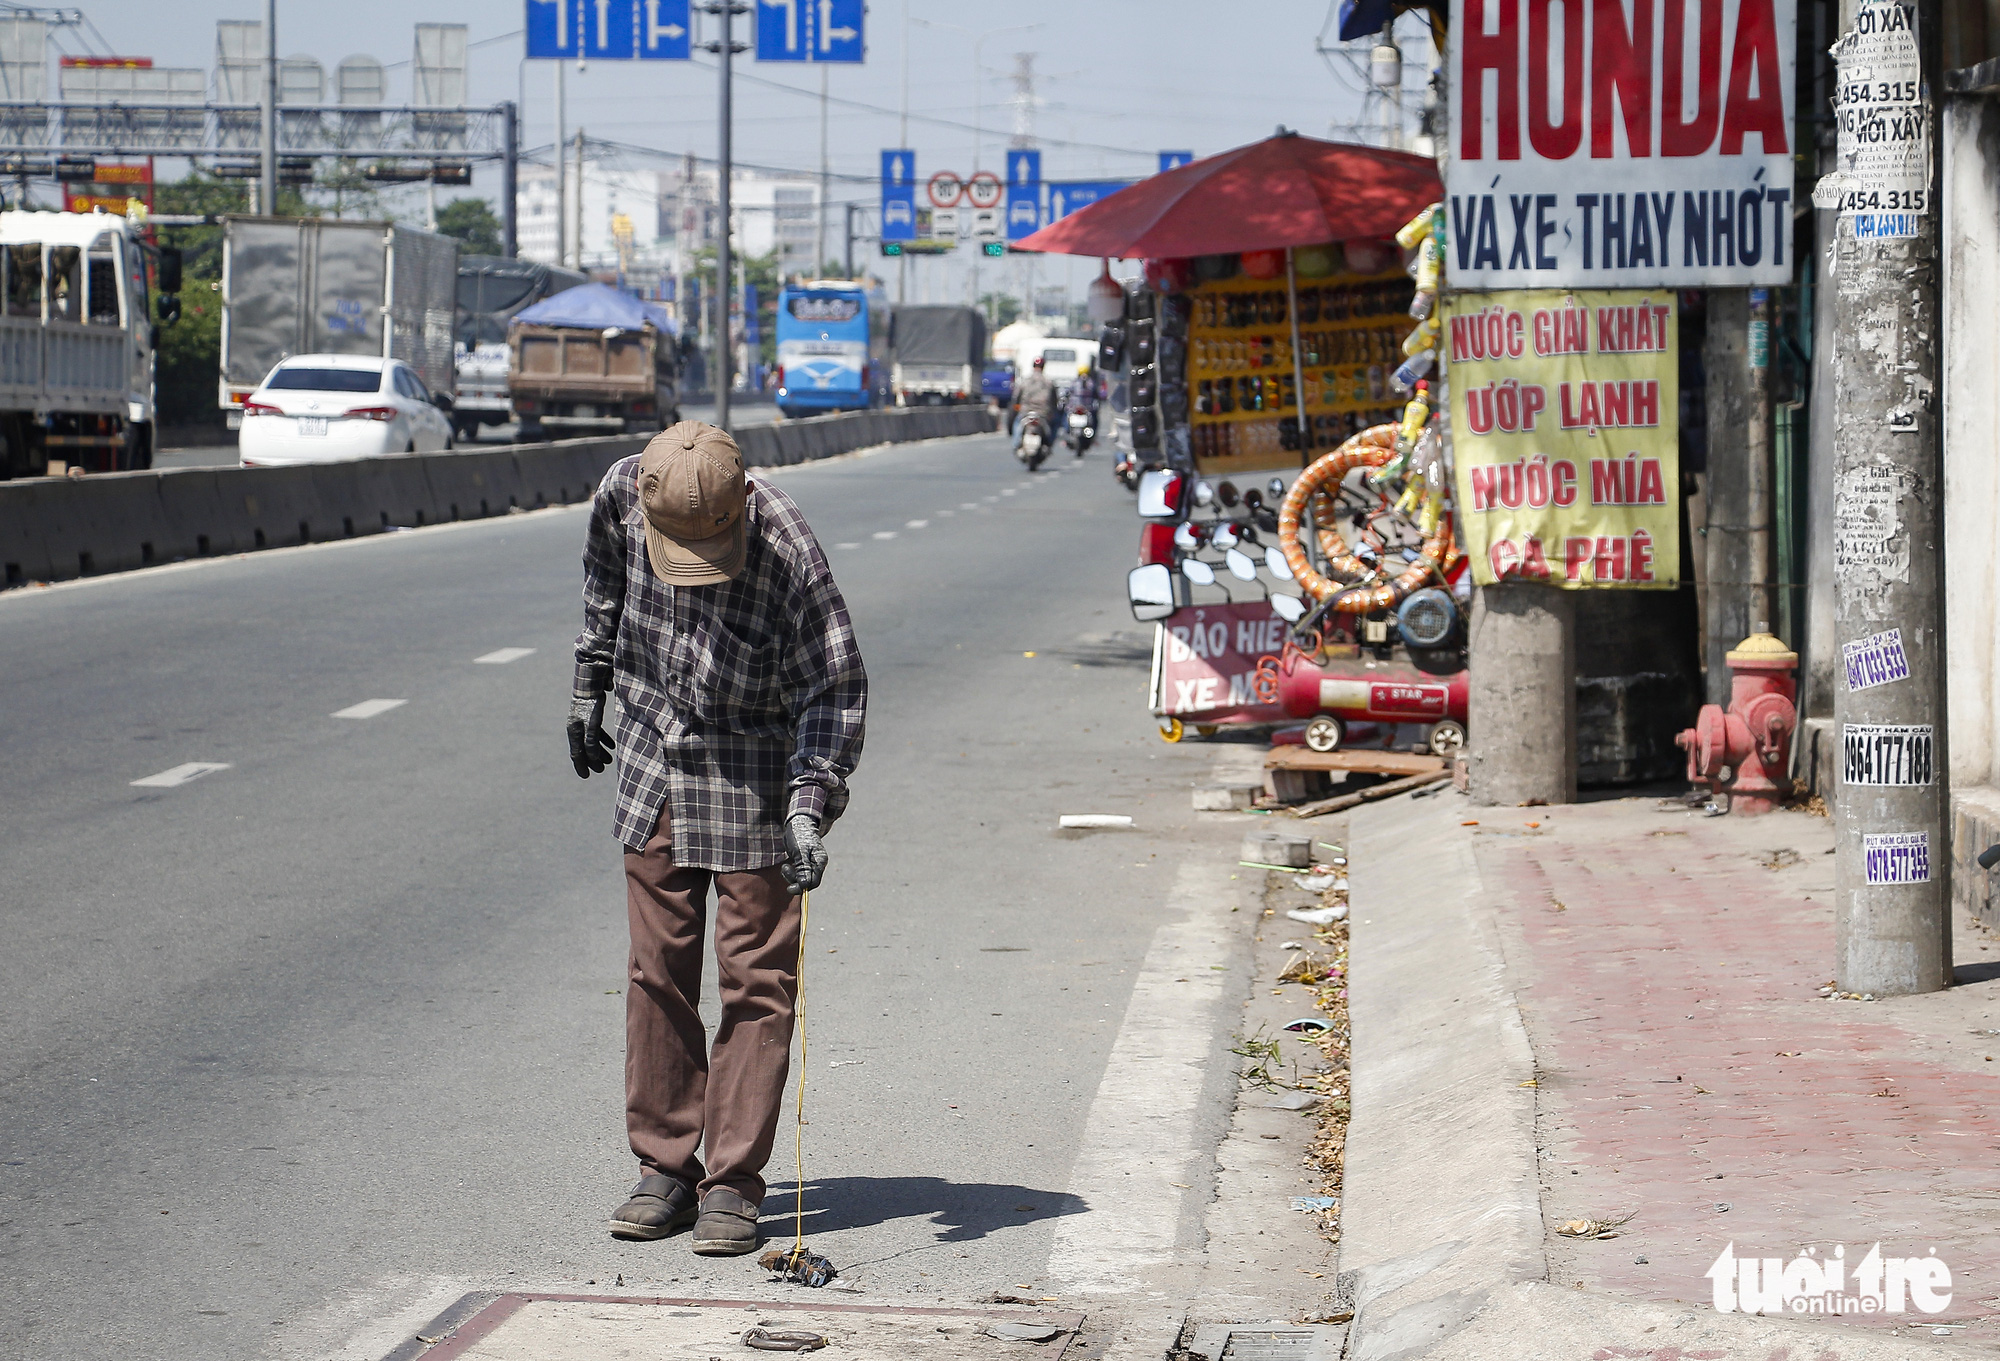 A man collects tire-puncturing nails along National Highway No.1 in Ho Chi Minh City. Photo: Chau Tuan / Tuoi Tre